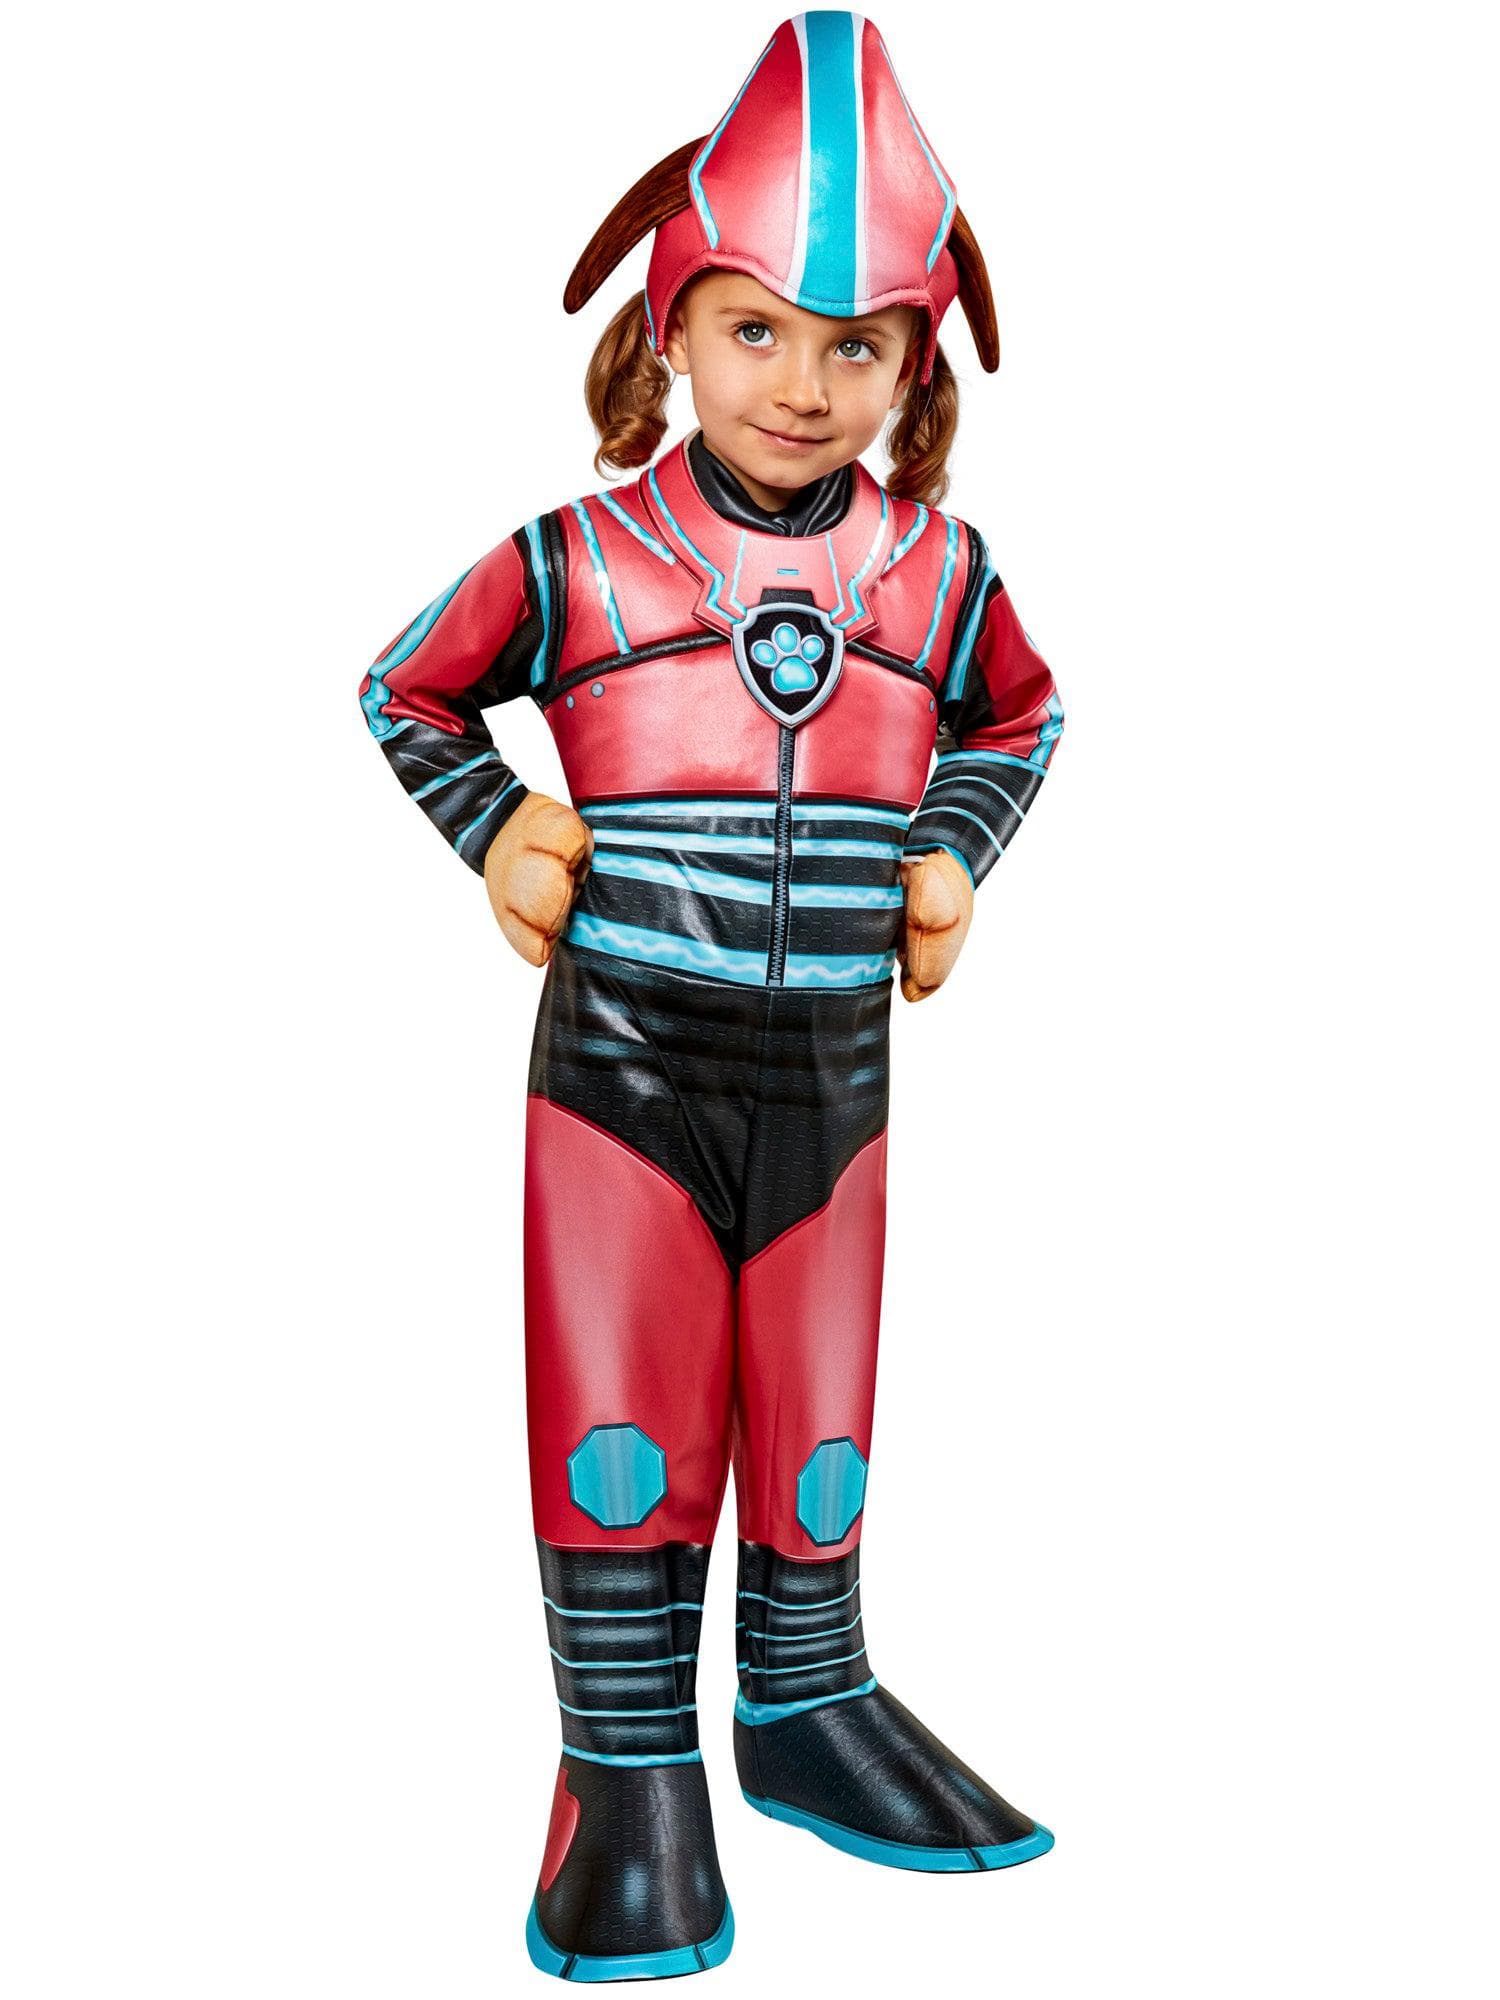 Paw Patrol 2 Mighty Liberty Costume for Toddlers - costumes.com